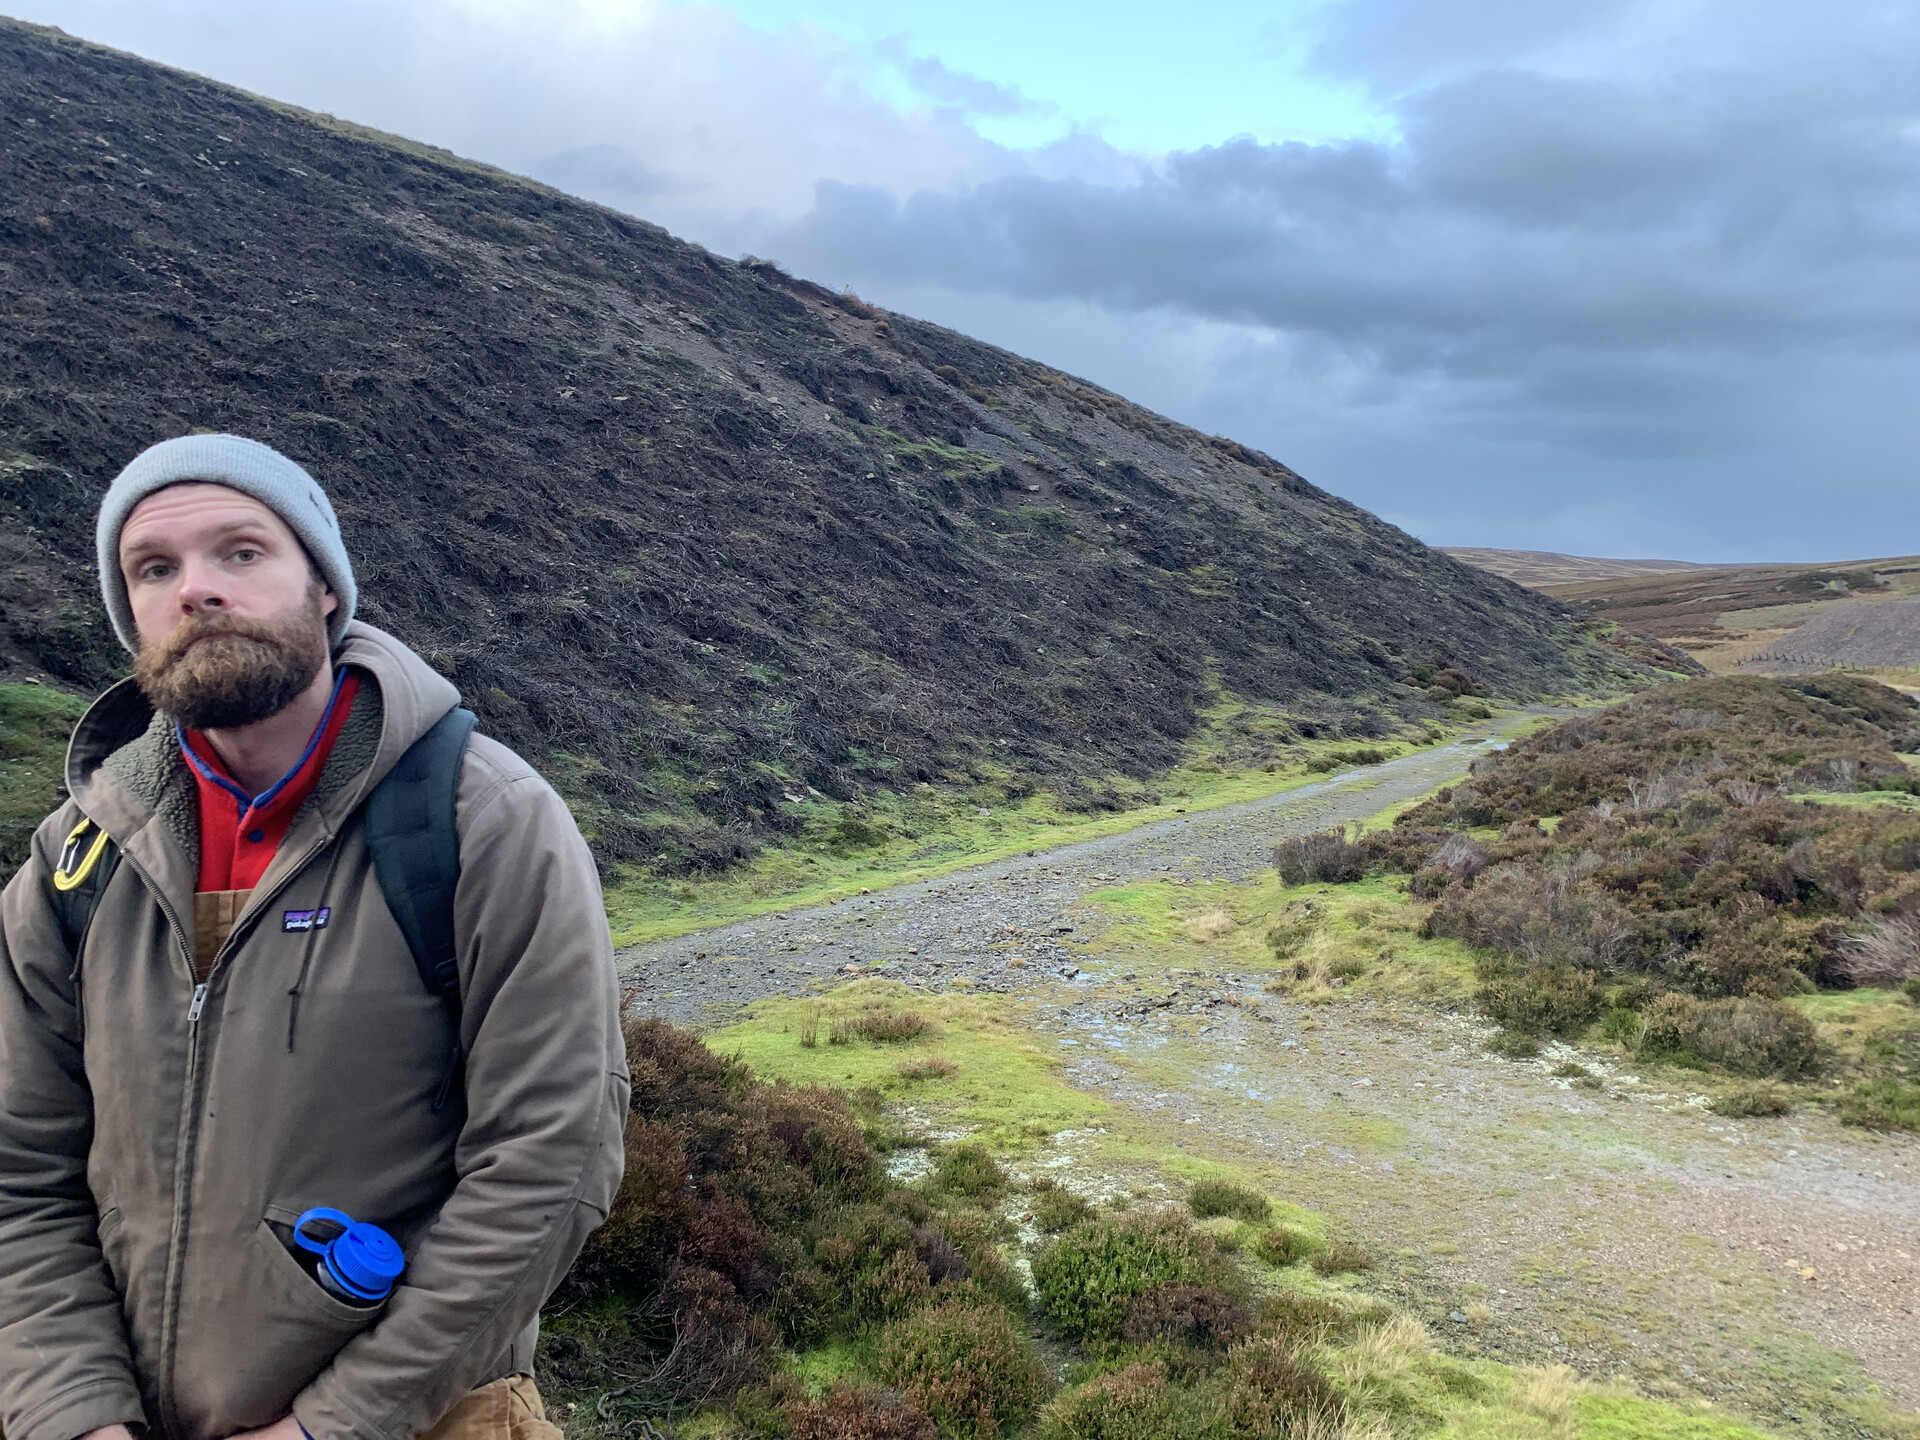 Yours truly amid the abandoned mine workings above Hamsterley Forest